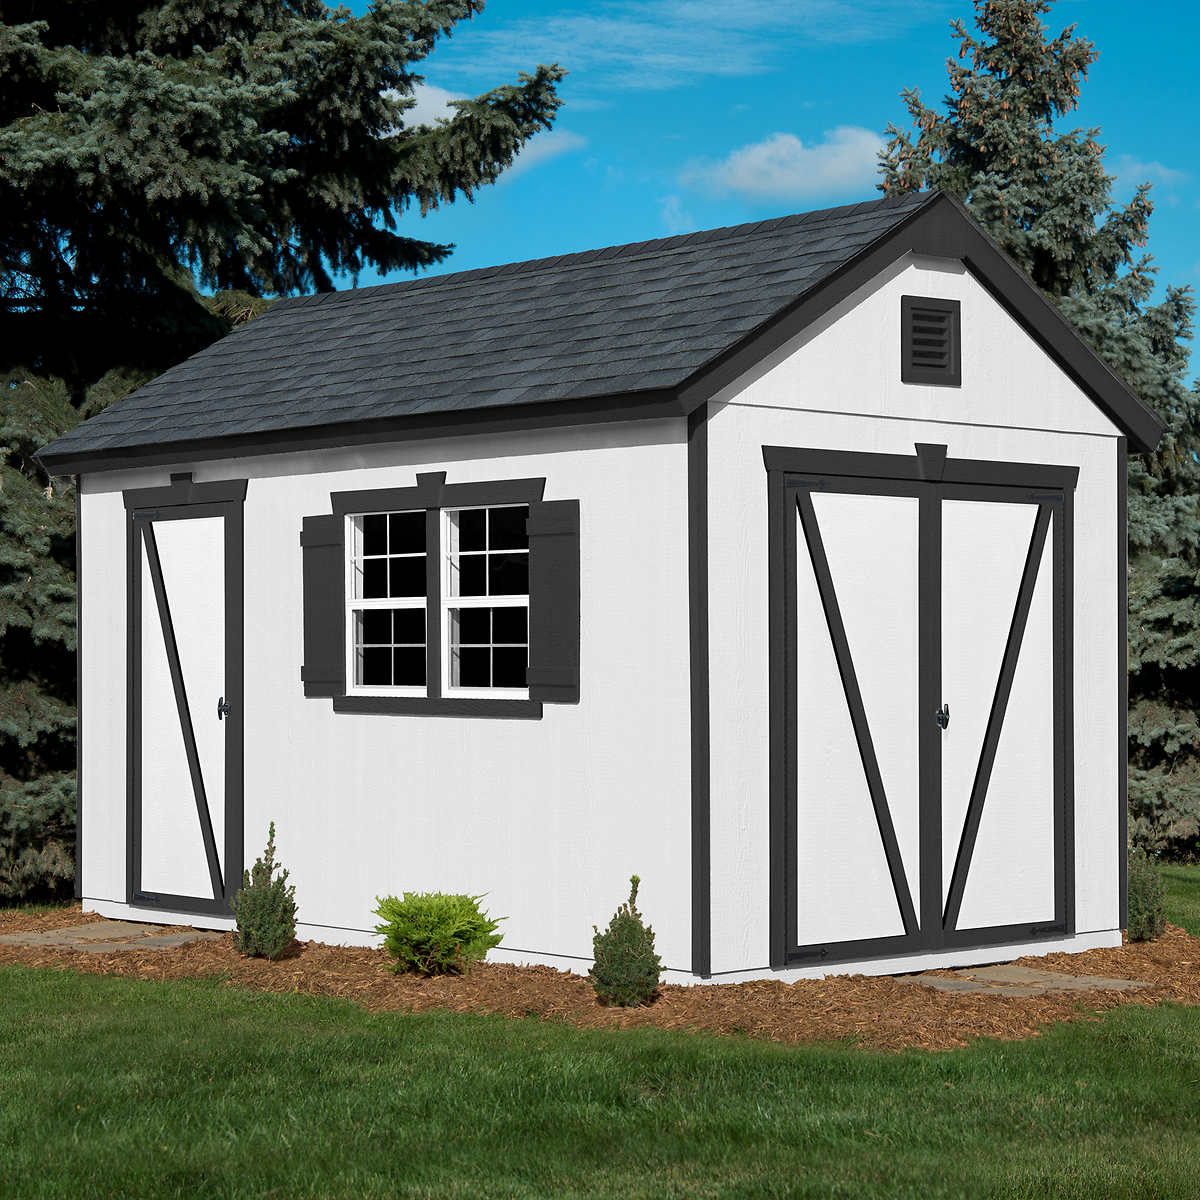 Crestwood 8' x 14' Wood Storage Shed, 934 Cubic Ft. of 